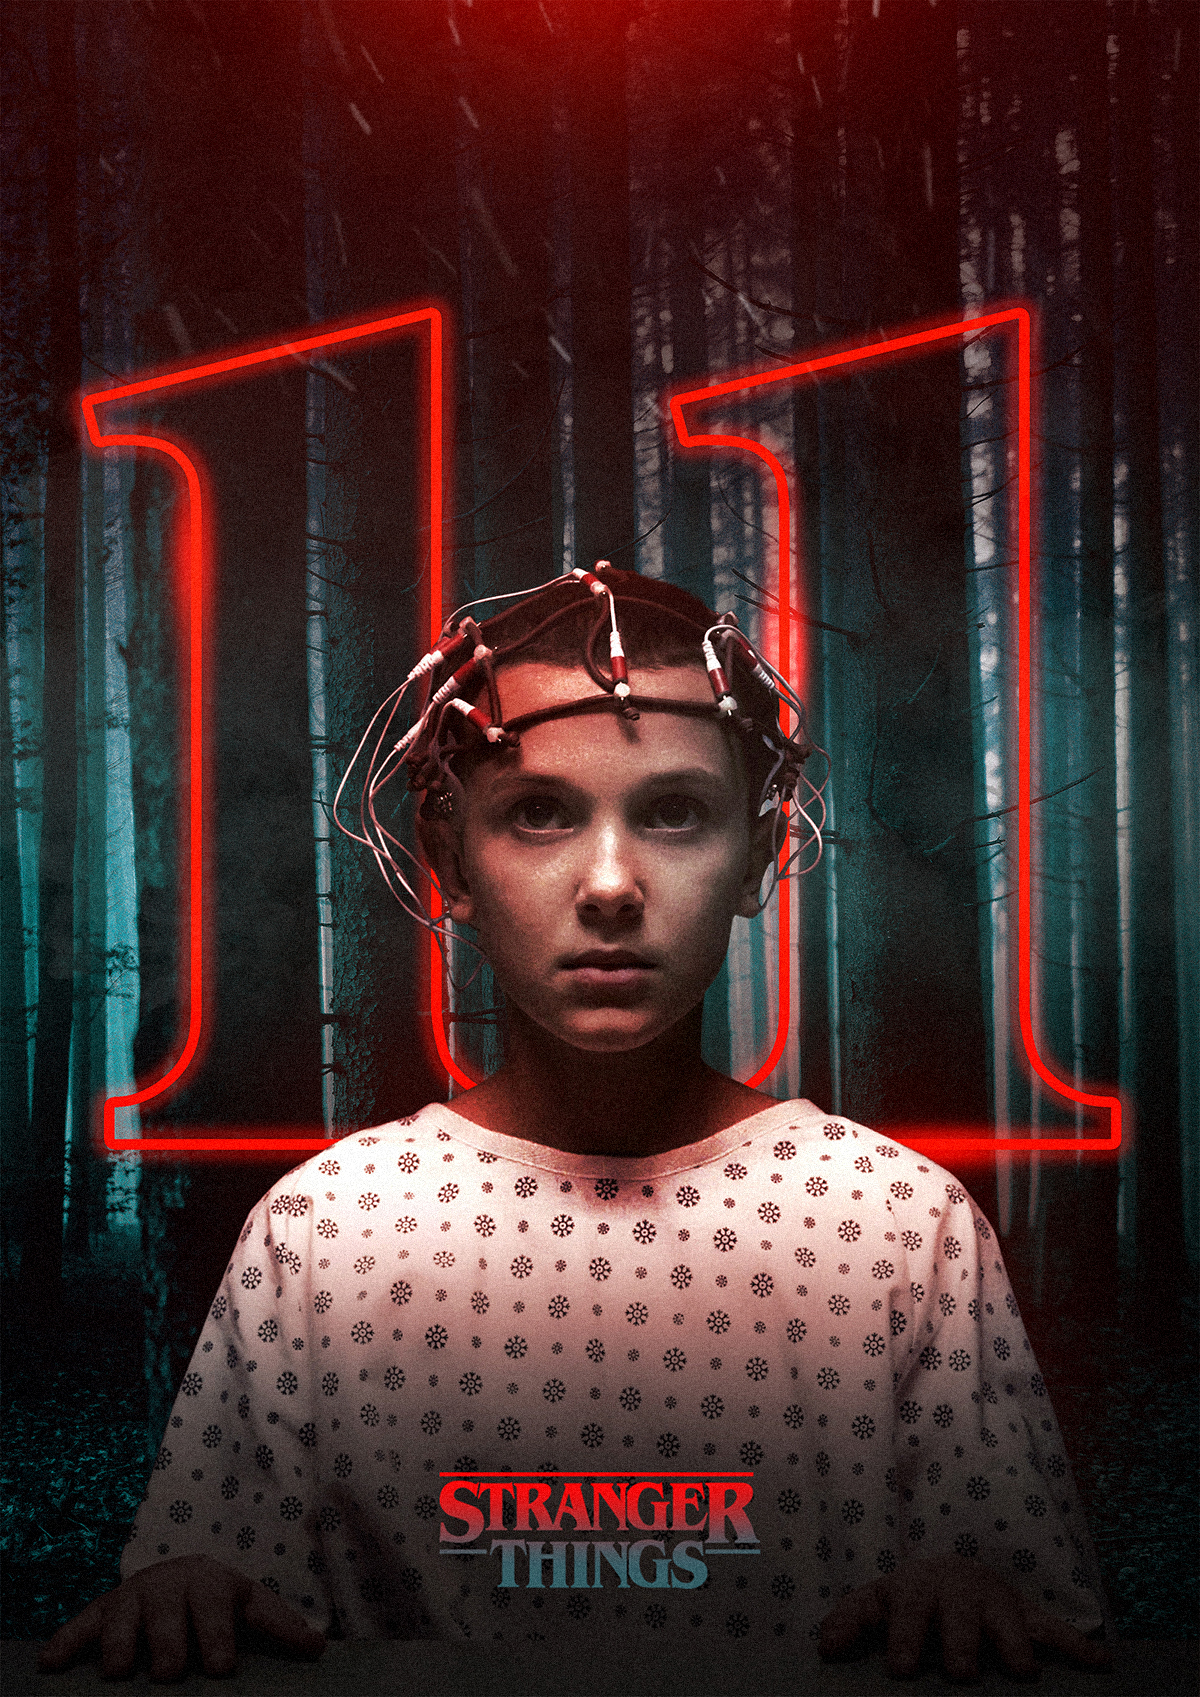 Rigved Sathe Stranger Things Posters (8)